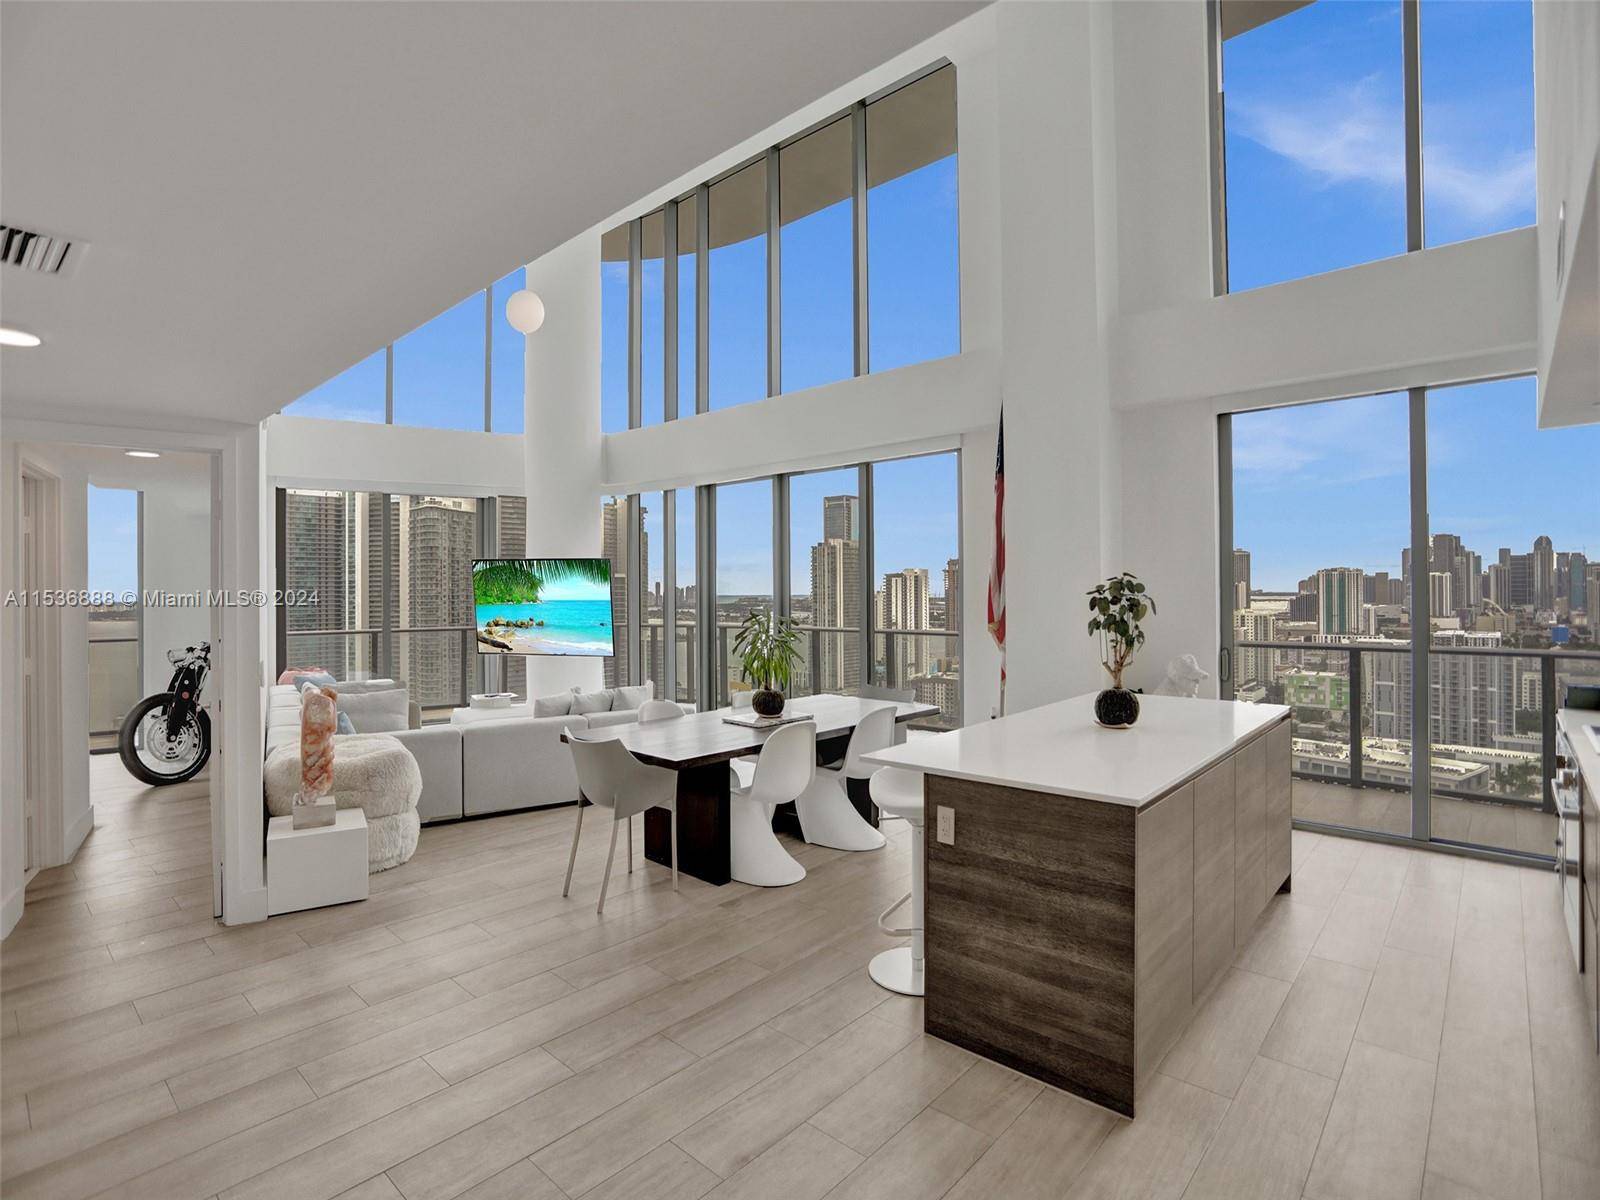 Welcome to the premier penthouse at Hyde, the absolute best that Midtown Miami has to offer Hyde 3204 is a SE corner 4 bed 4.